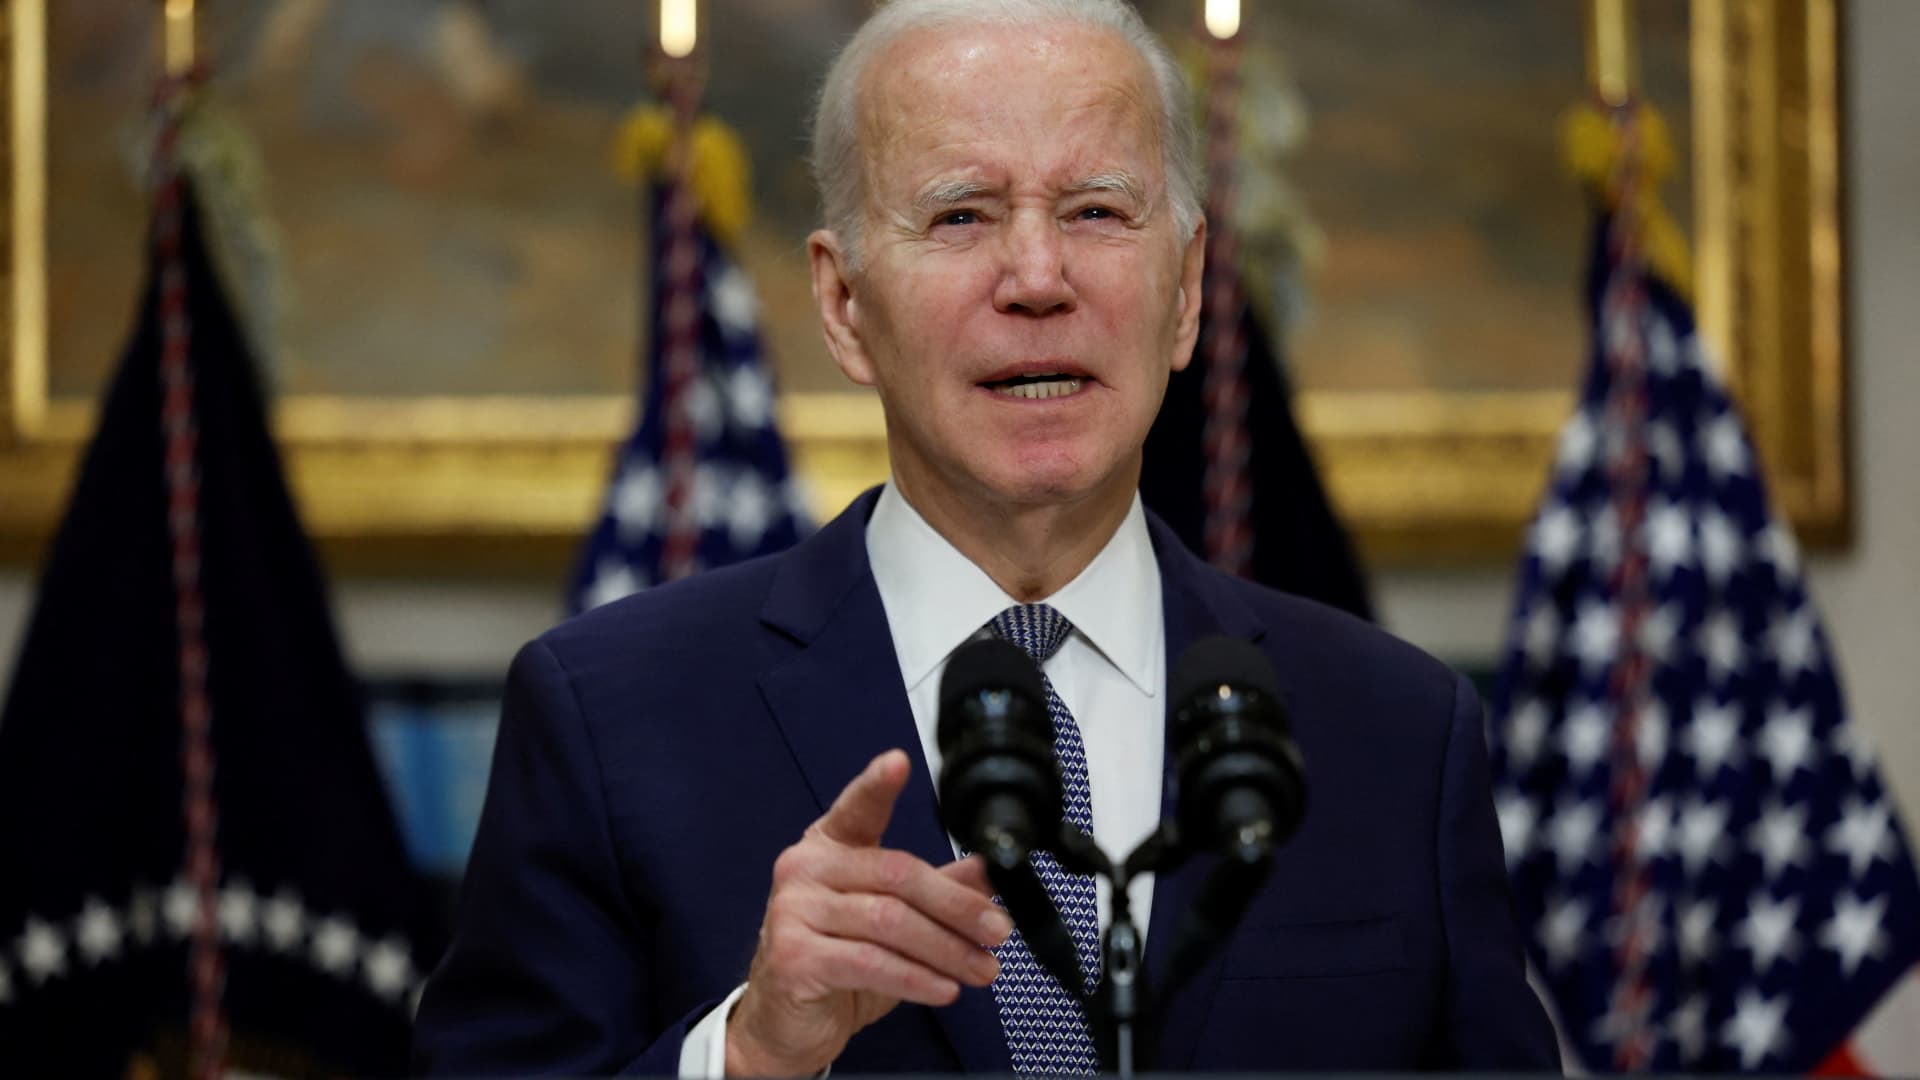 ‘That’s how capitalism works,’ Biden says of SVB, Signature Bank investors who lost money in failed banks